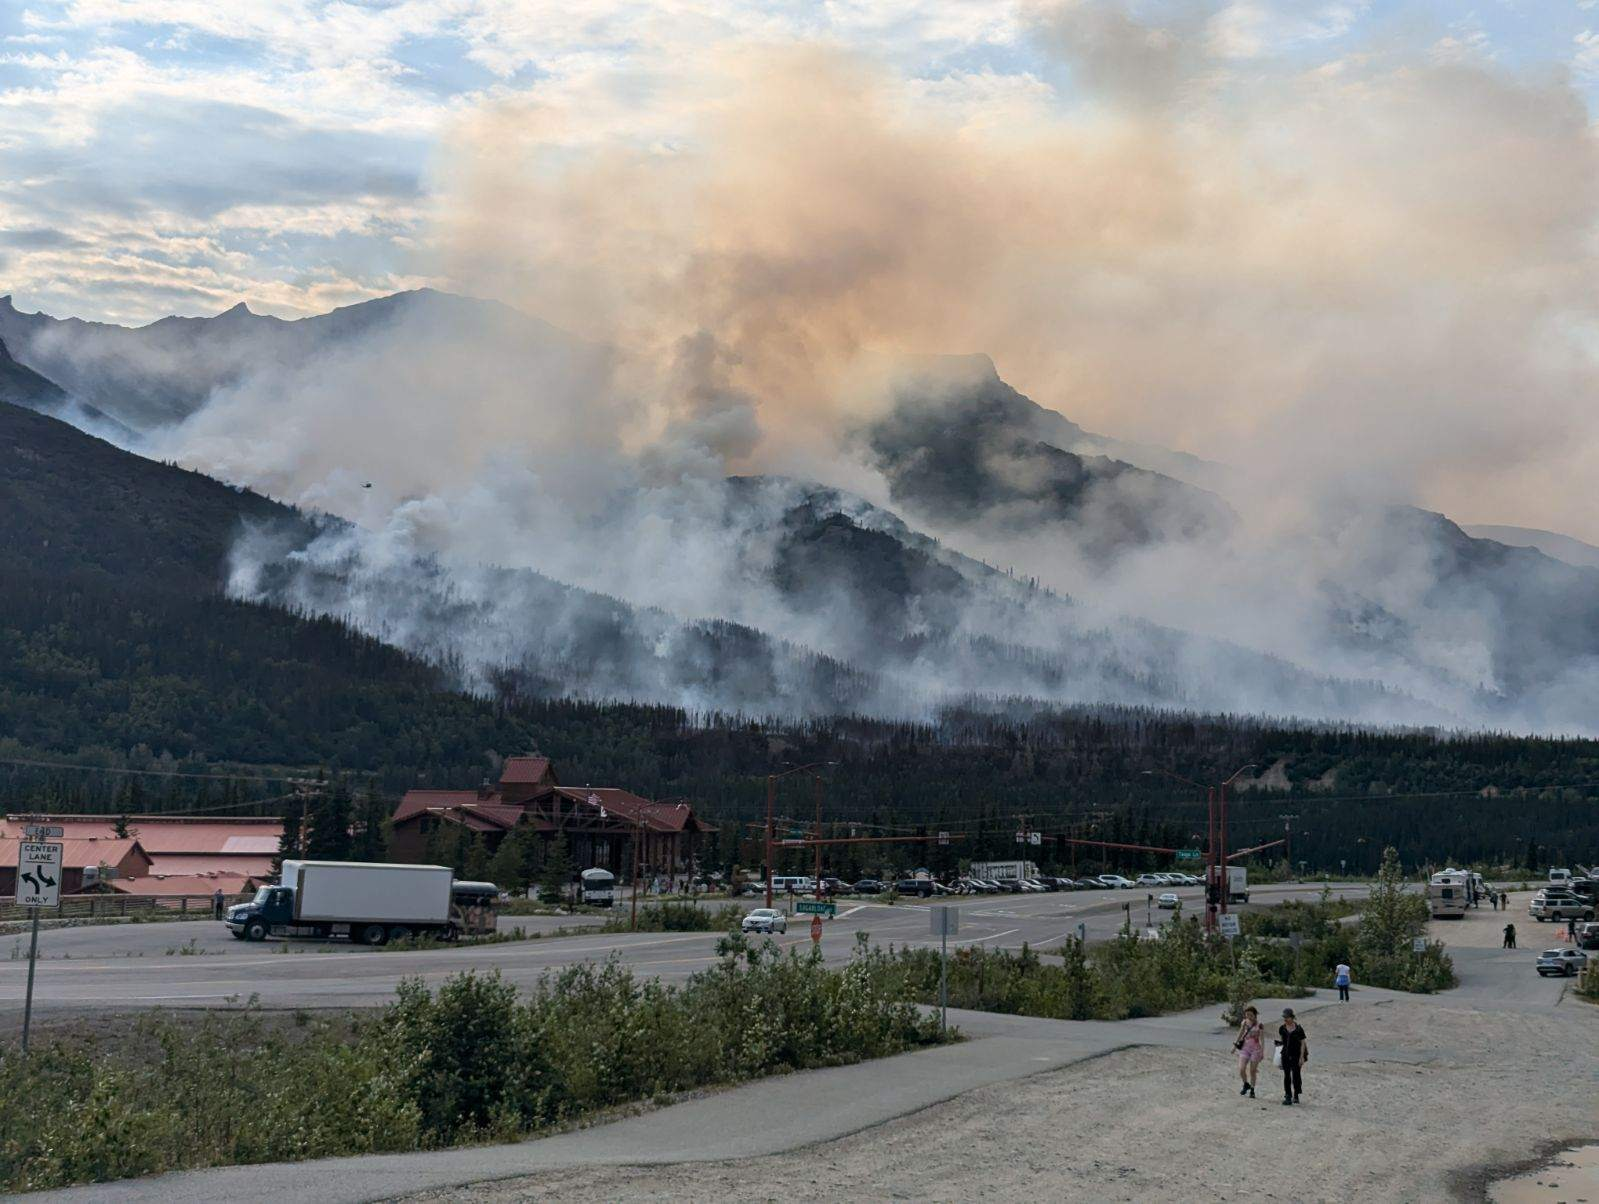 Heavy smoke rises from forested mountains near a commecial area.